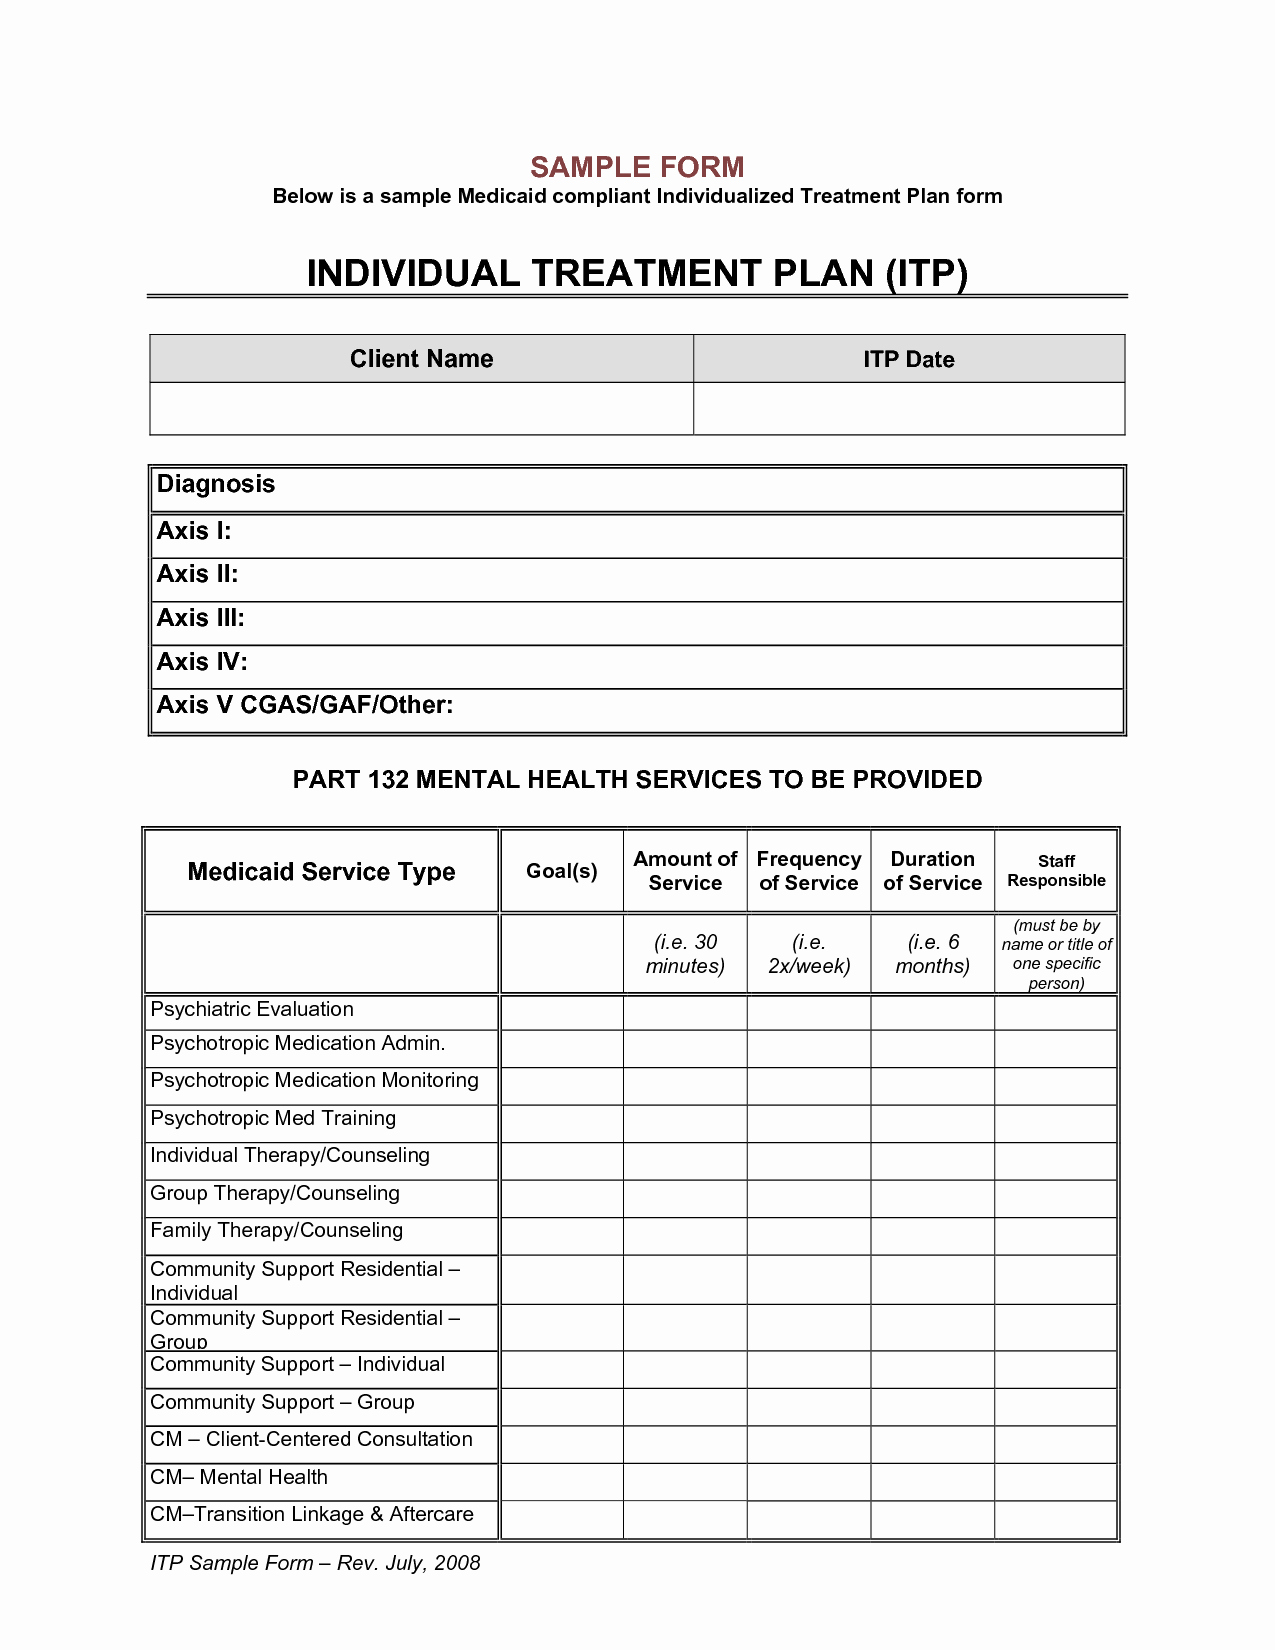 Substance Abuse Treatment Plan Template Awesome Individual Treatment Plan Template Buyjsf6x